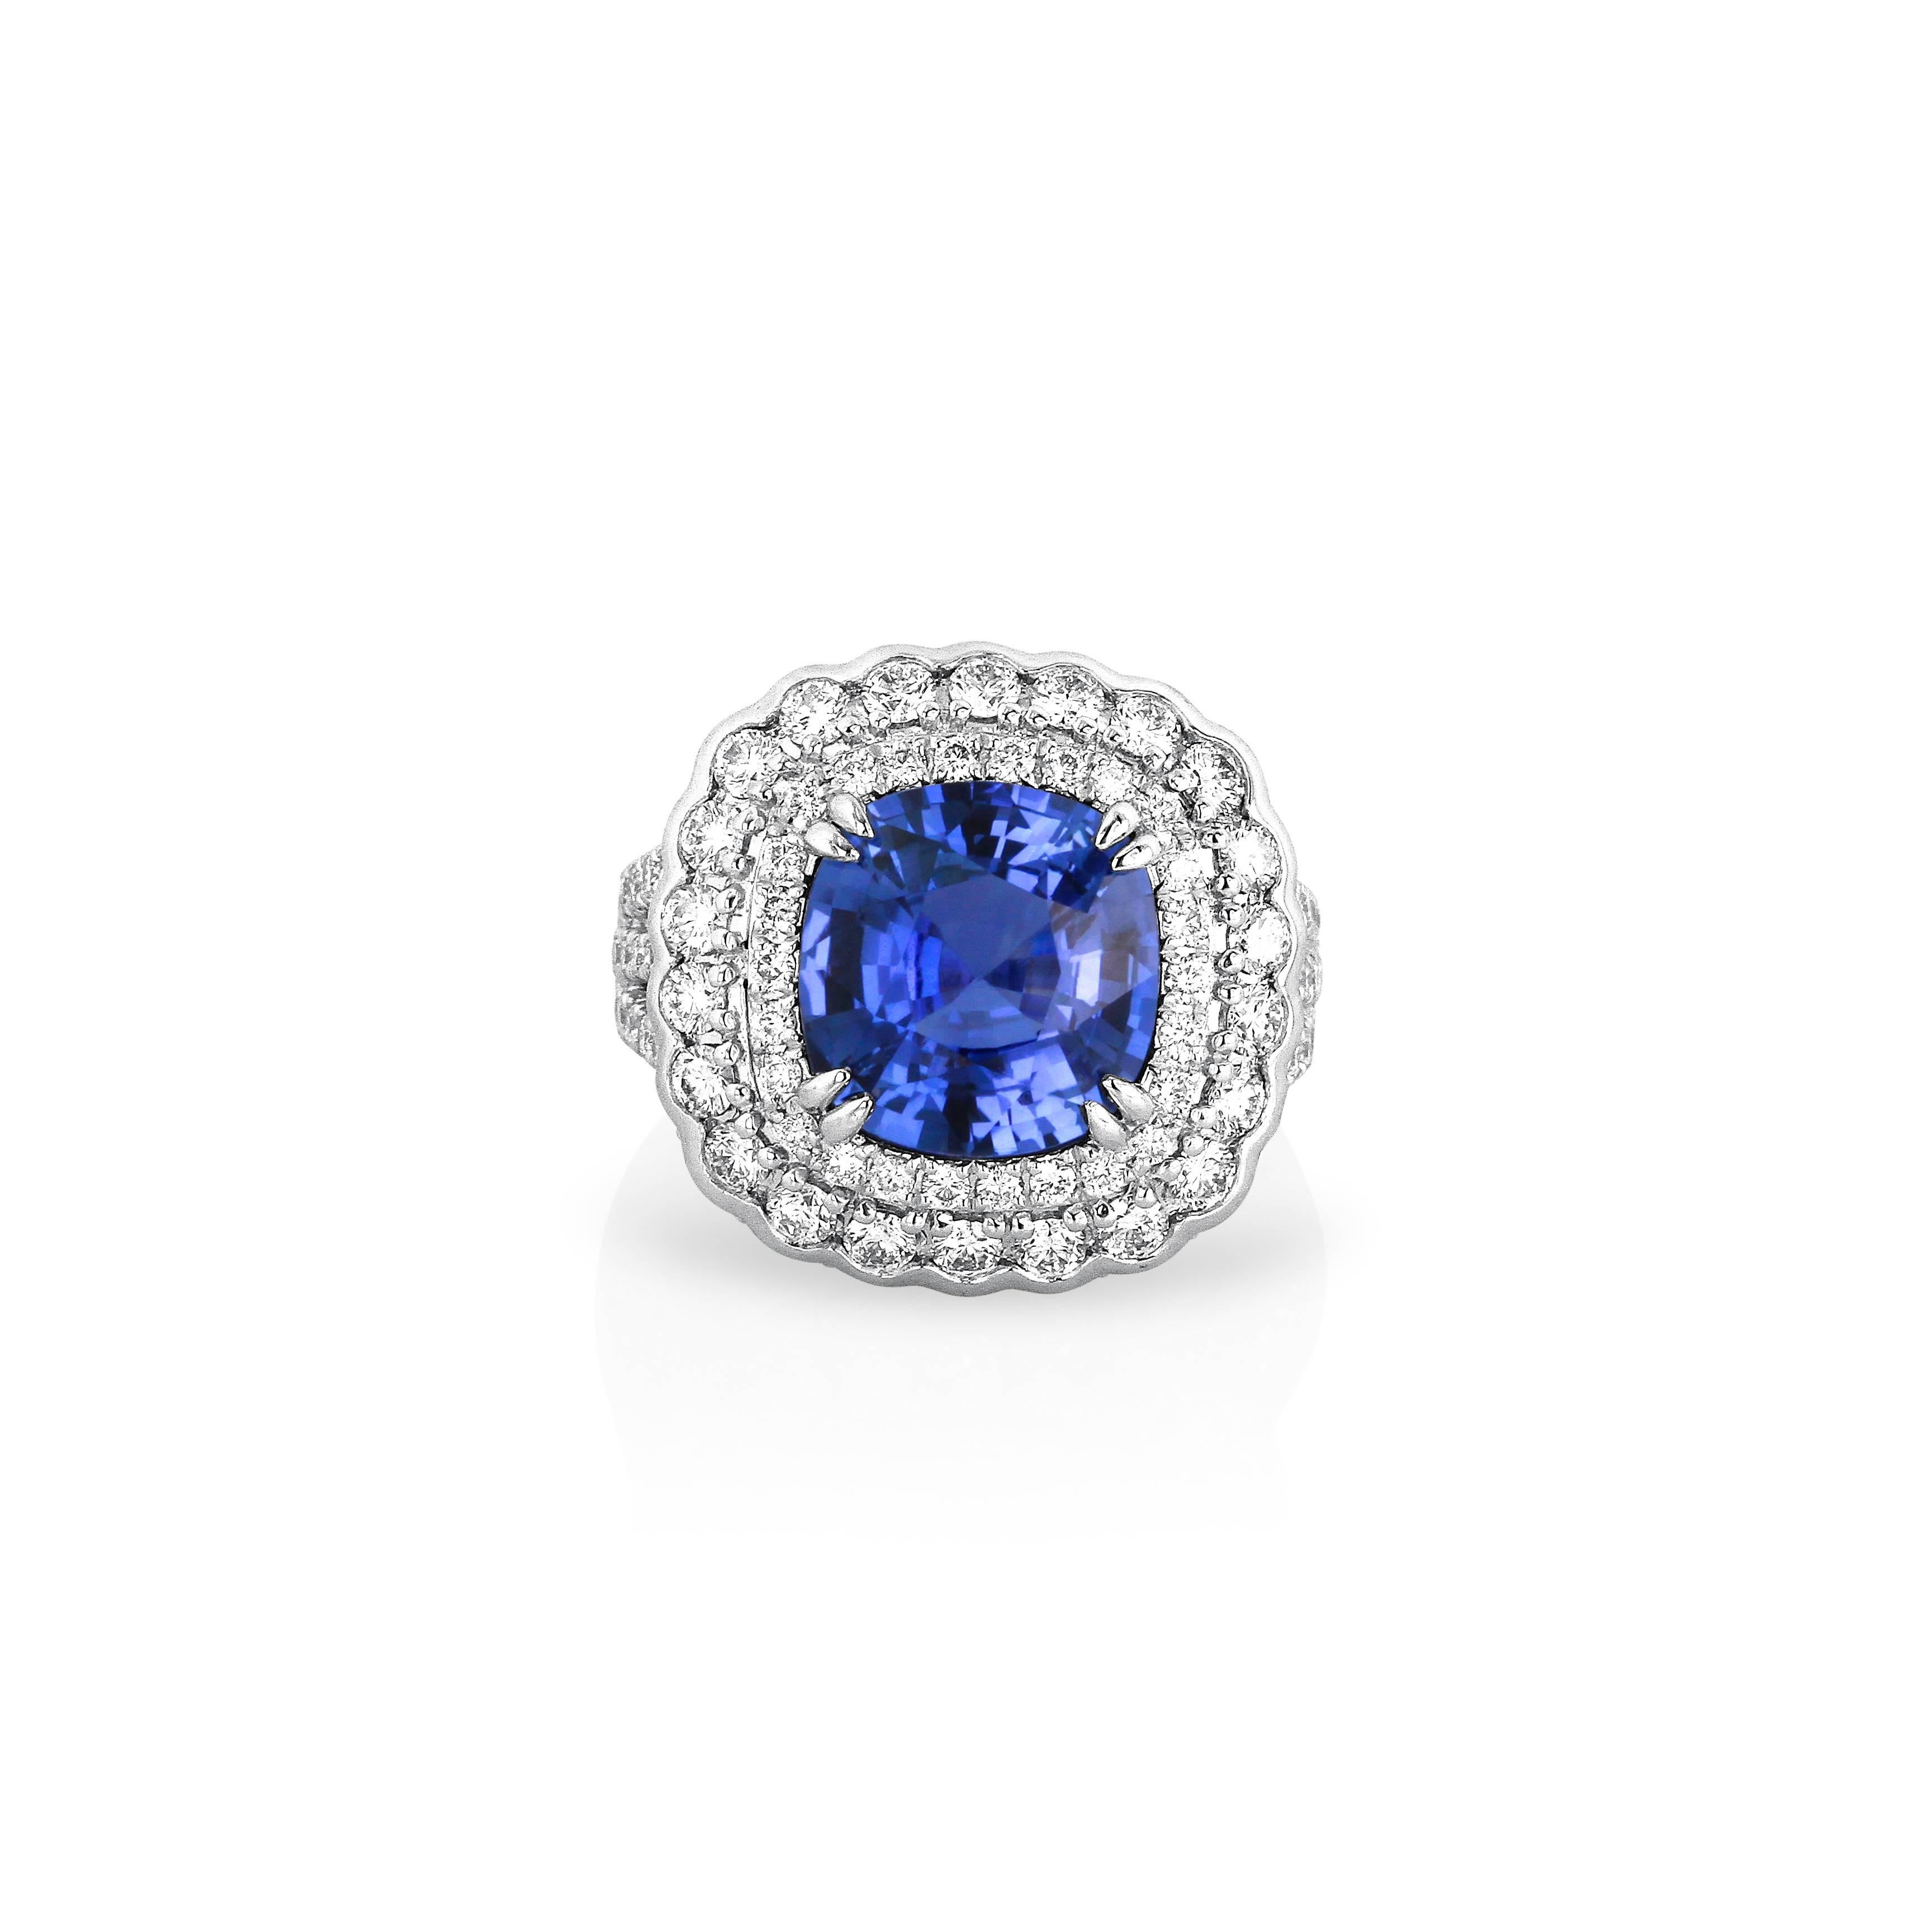 Yael Designs created a modern classic ring featuring a GRS certified cushion blue sapphire encrusted with 2.44 carats of brilliant white diamonds from halo to shank to lower gallery all mounted in platinum. 